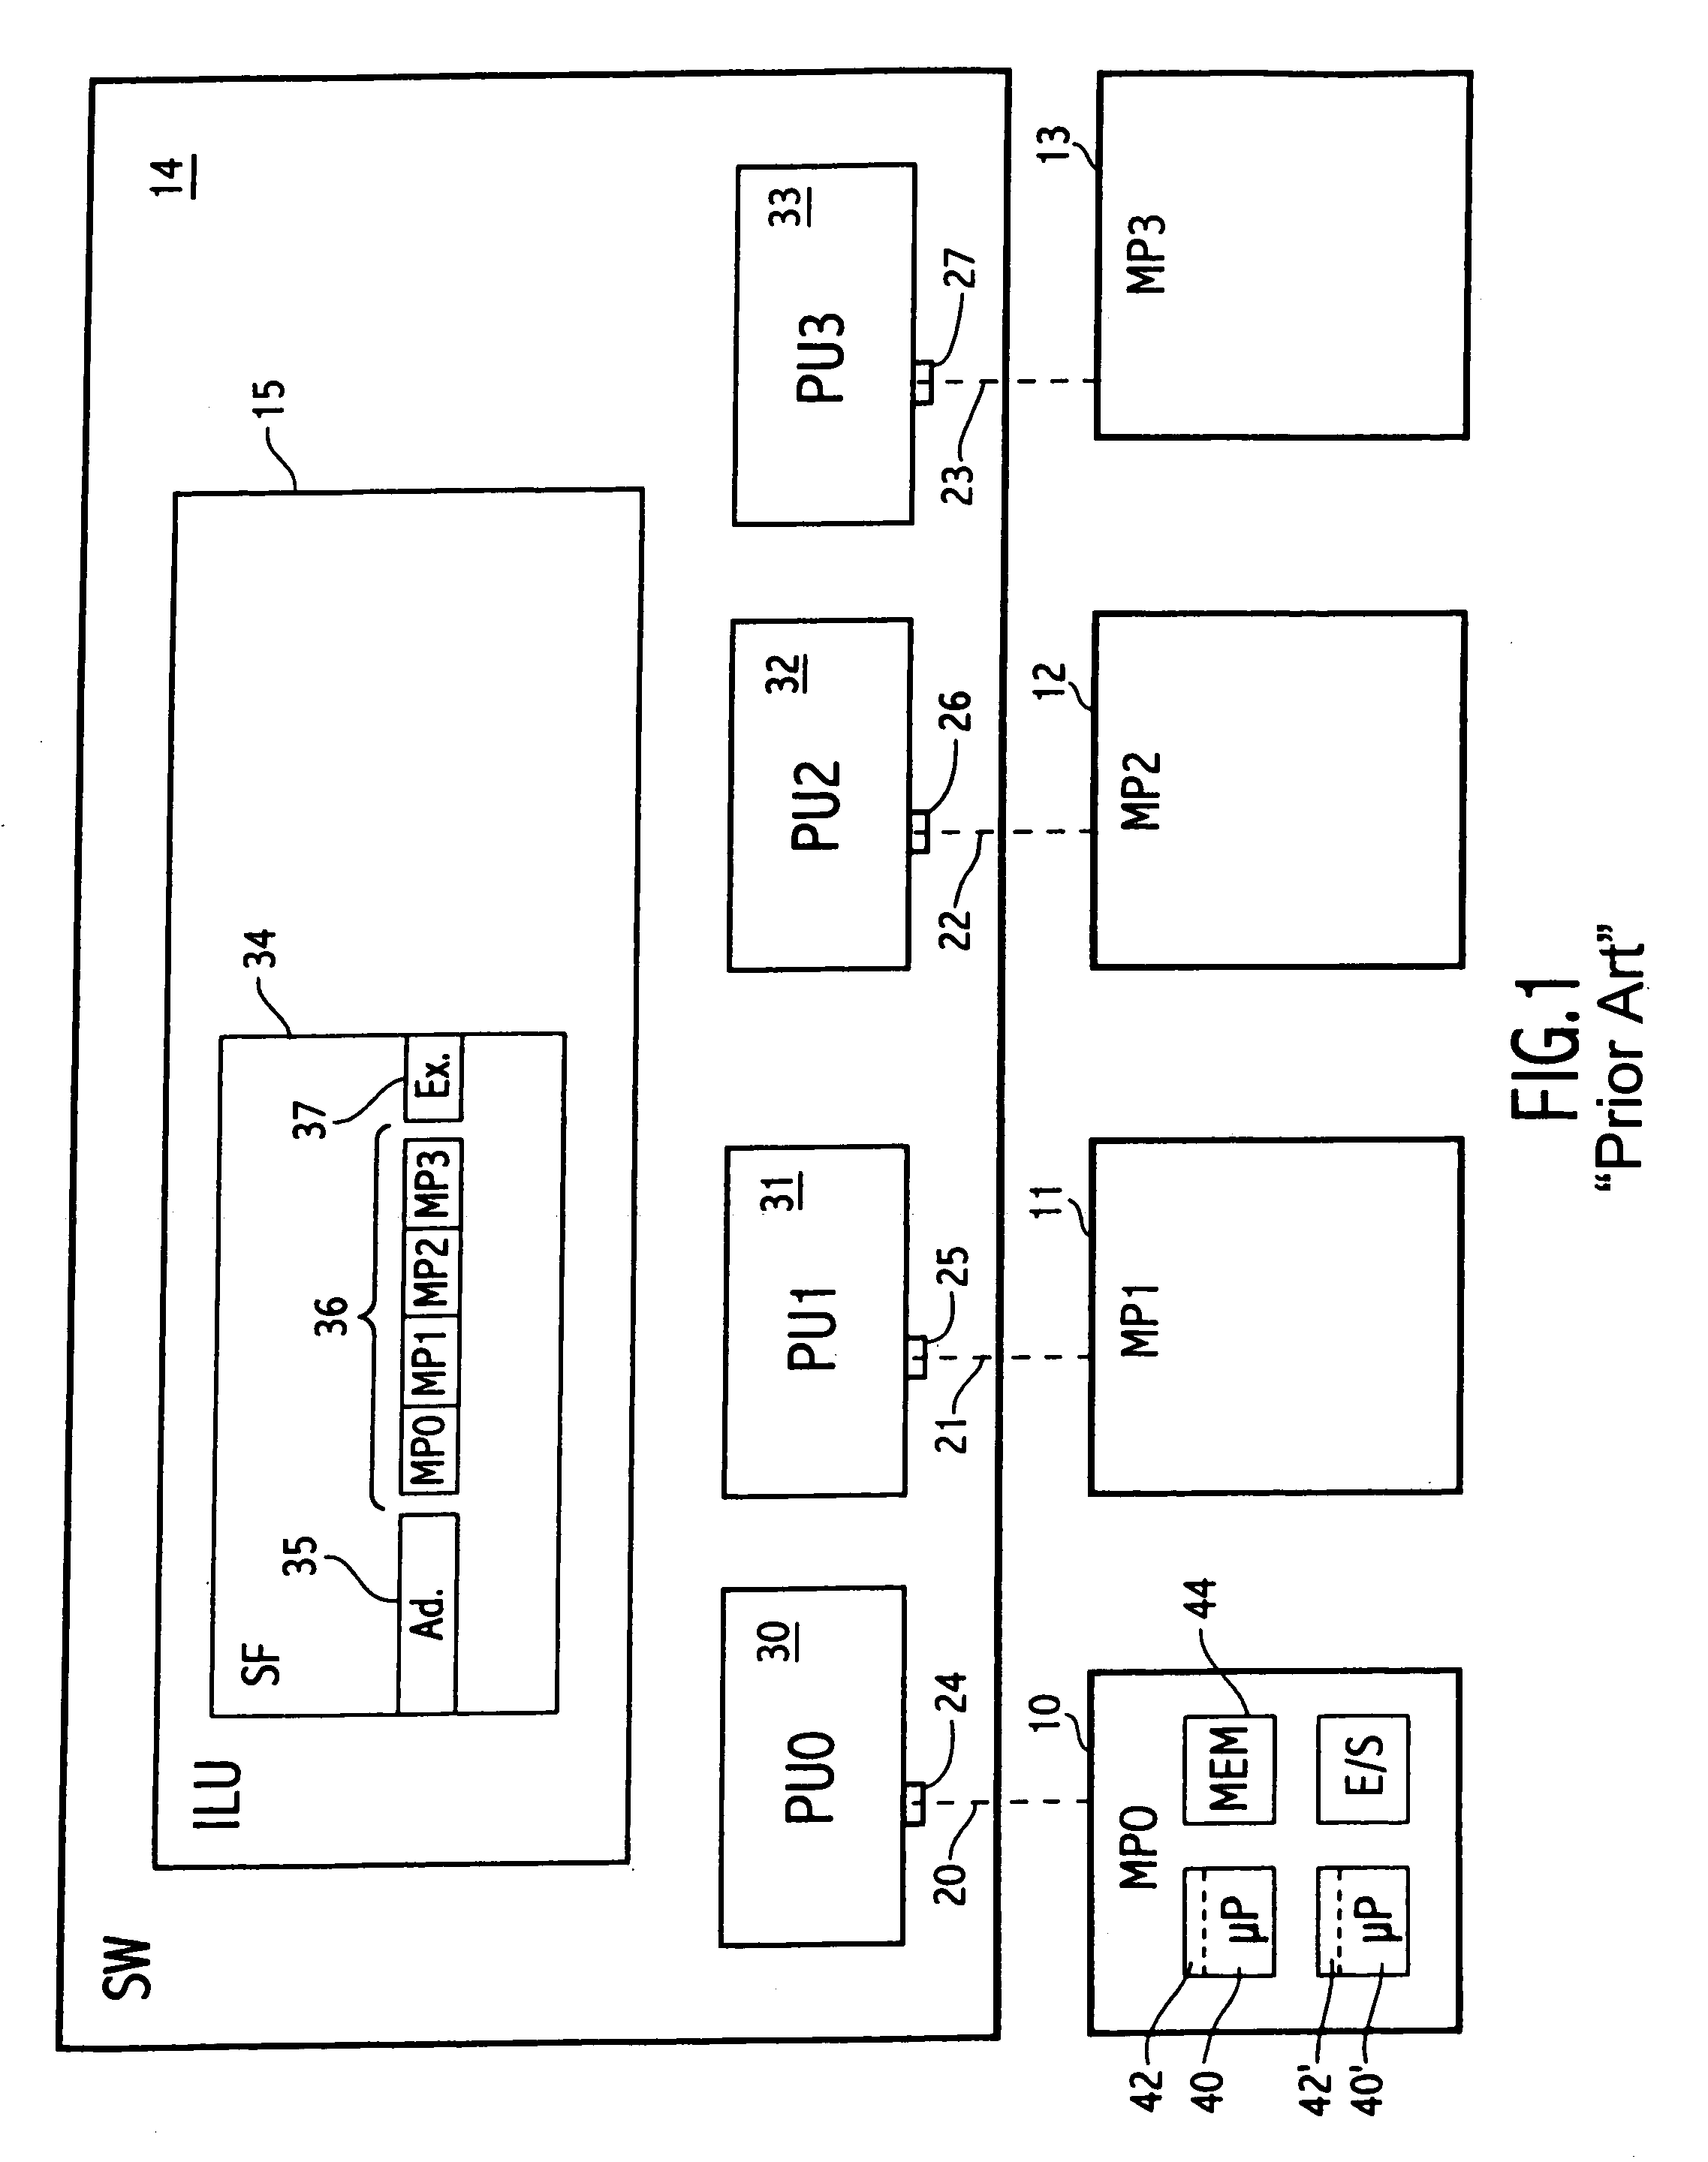 Coherence controller for a multiprocessor system, module, and multiprocessor system with a multimodule architecture incorporating such a controller